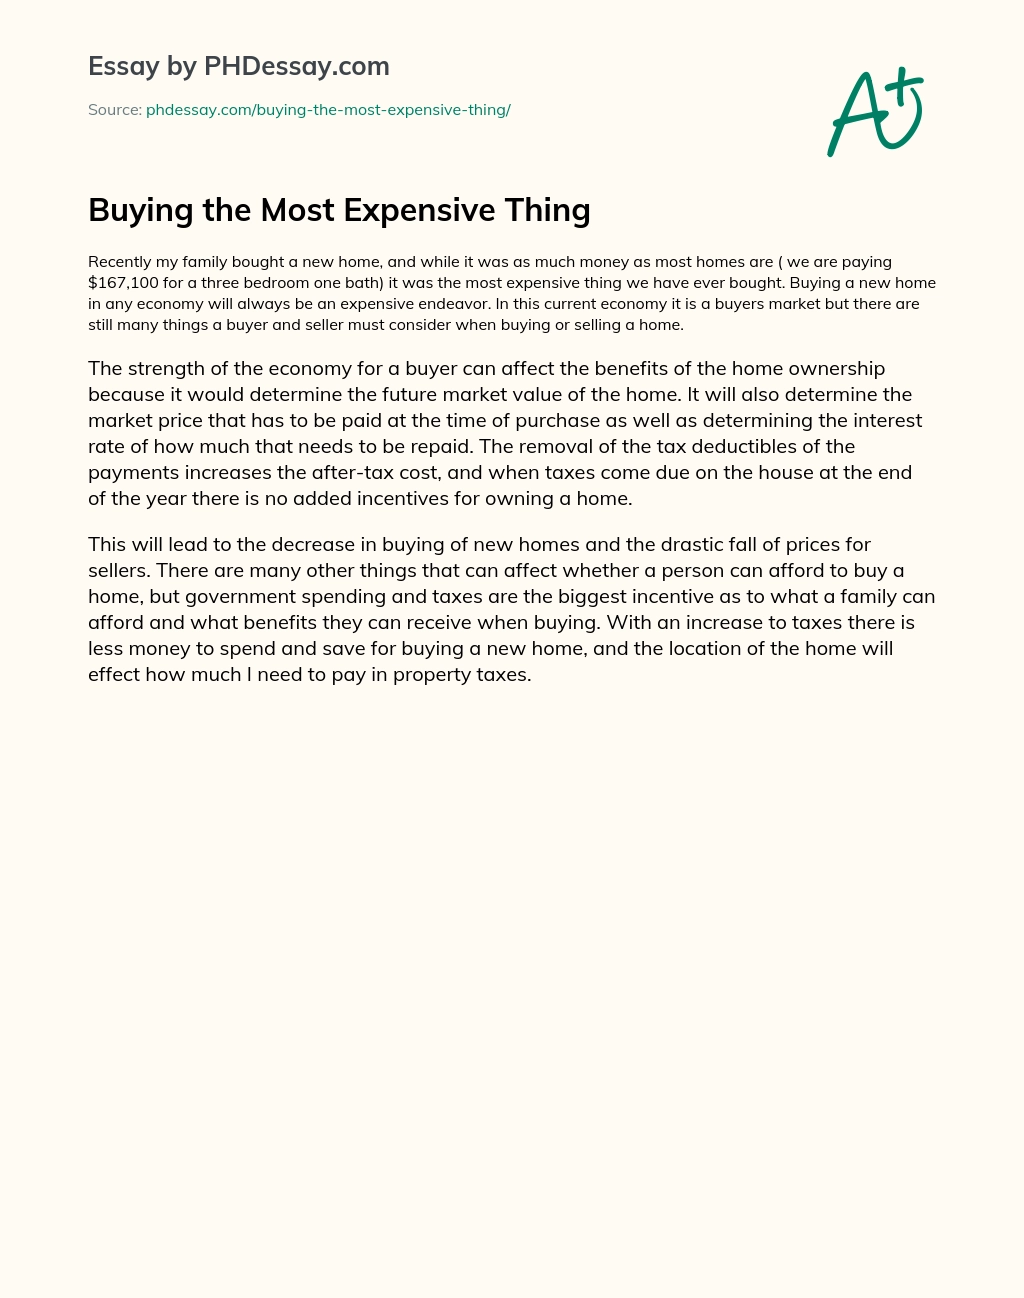 Buying the Most Expensive Thing essay